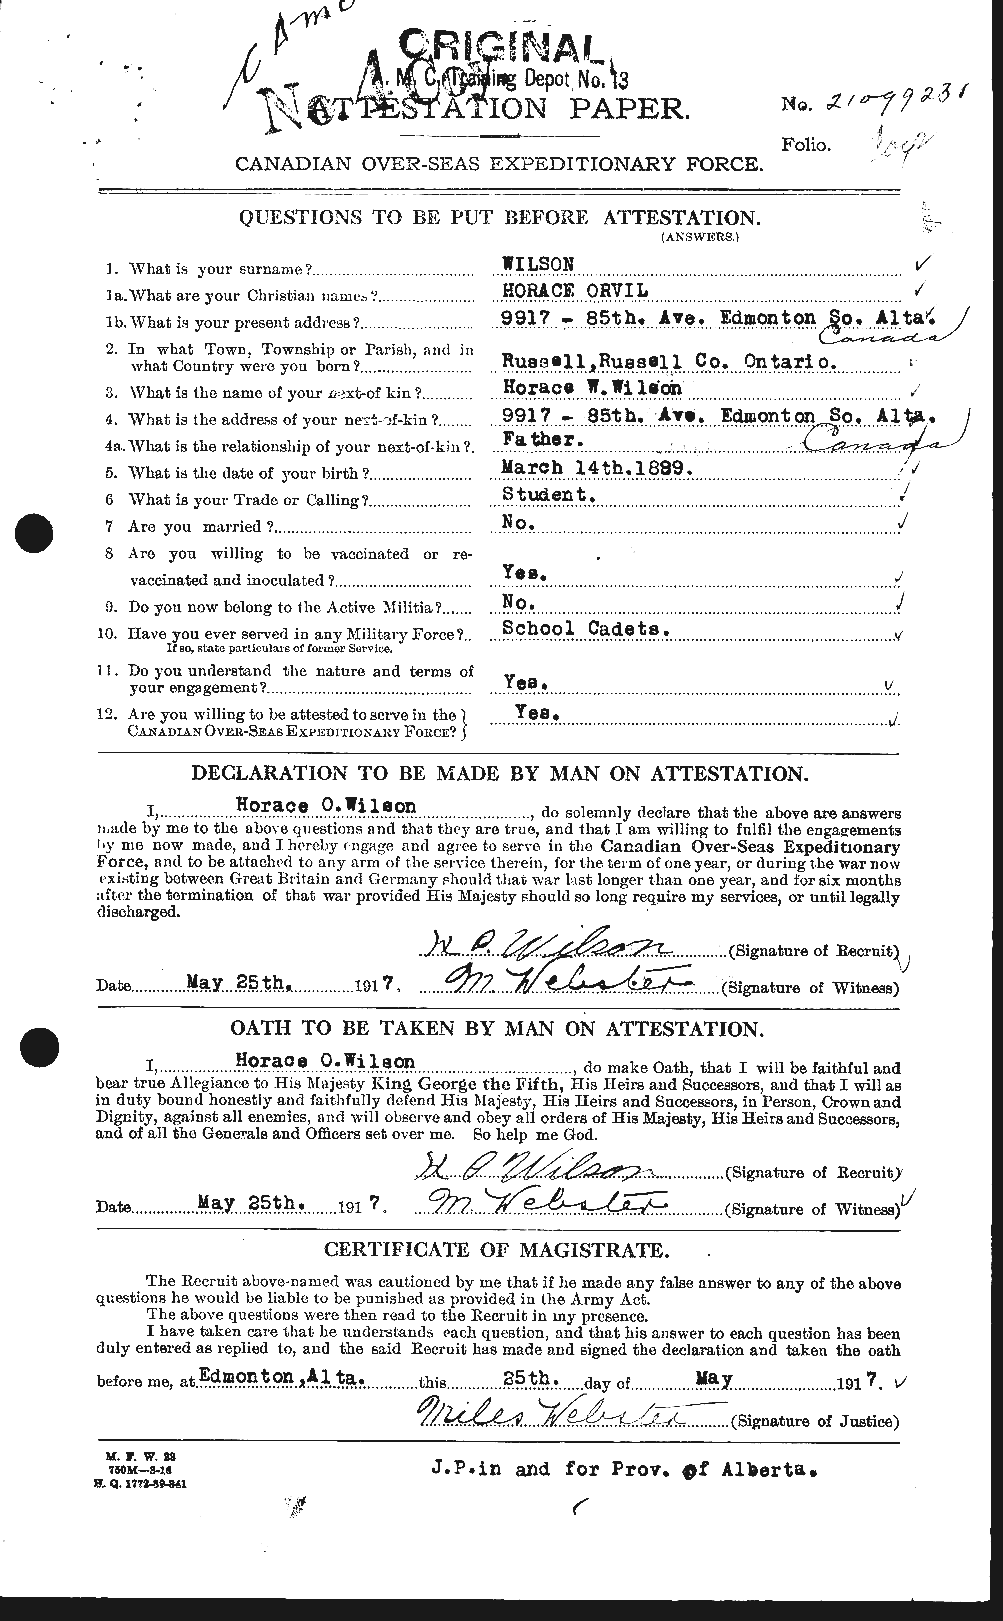 Personnel Records of the First World War - CEF 679587a